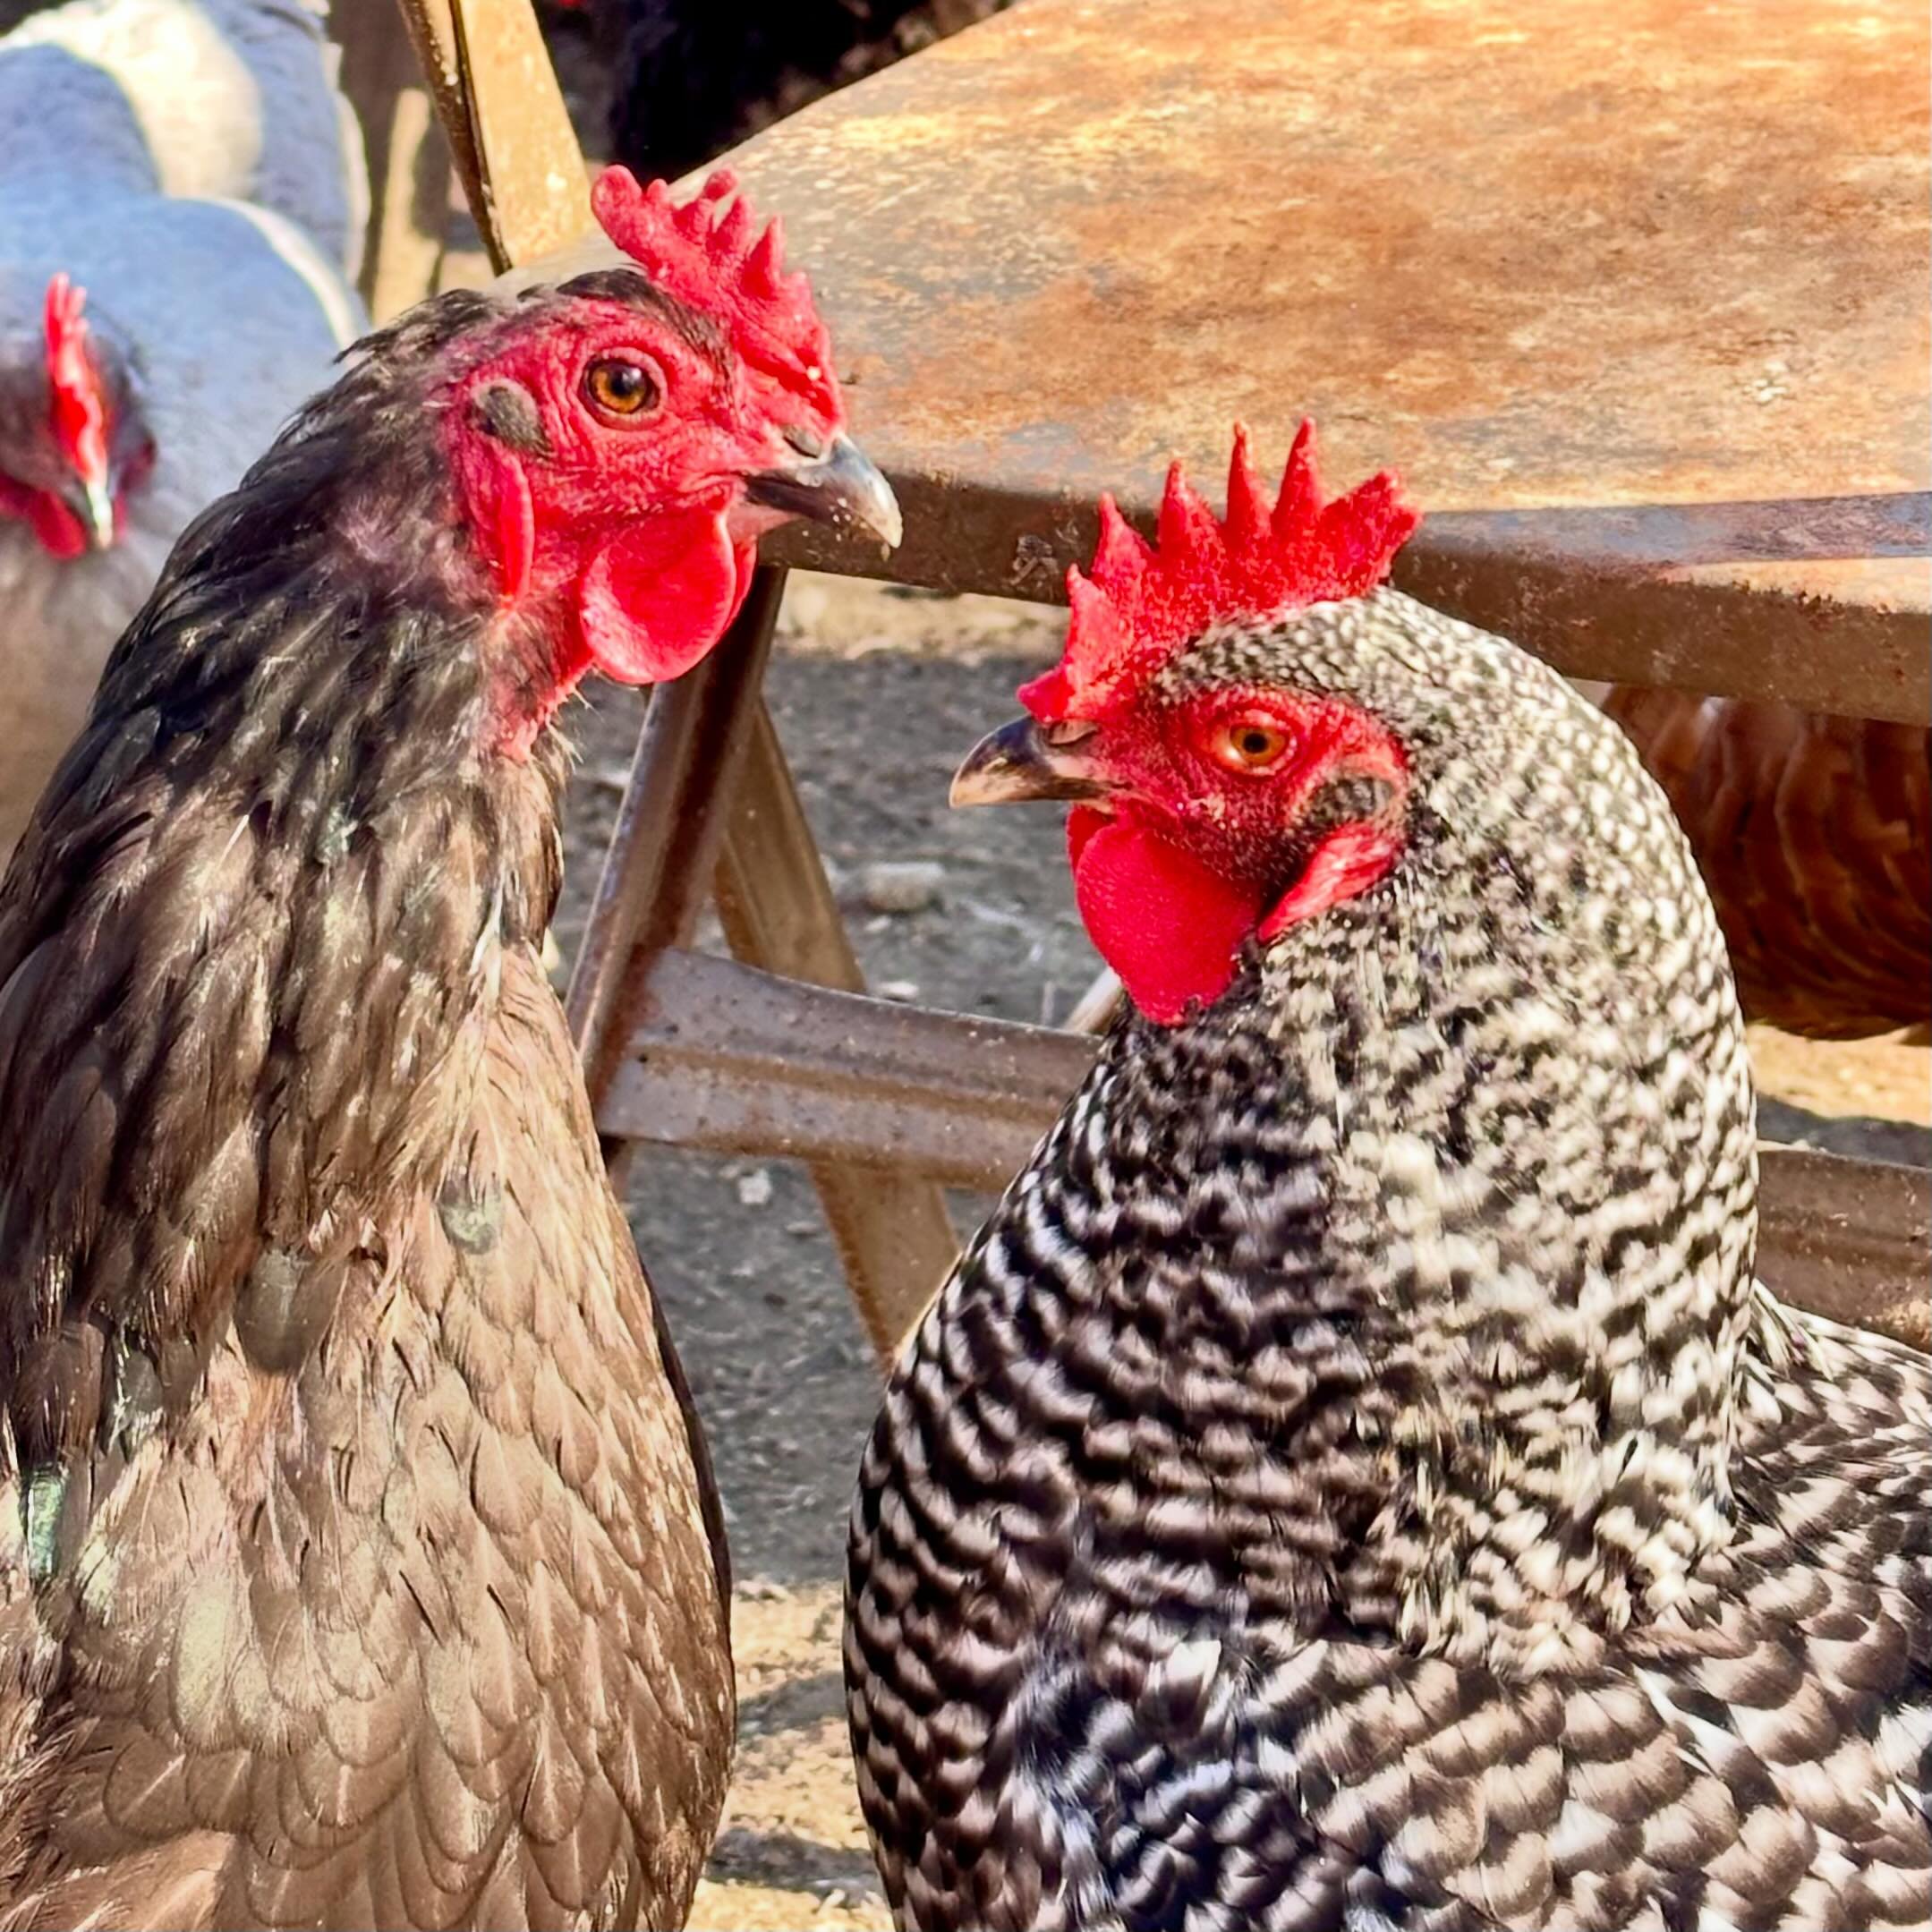 It&rsquo;s going to be a beautiful day on the farm today and the chickens are discussing their plans in the sun! ☀️ 
#CultivateCareFarms #BoltonMA #FarmBasedTherapy #TherapyChickens